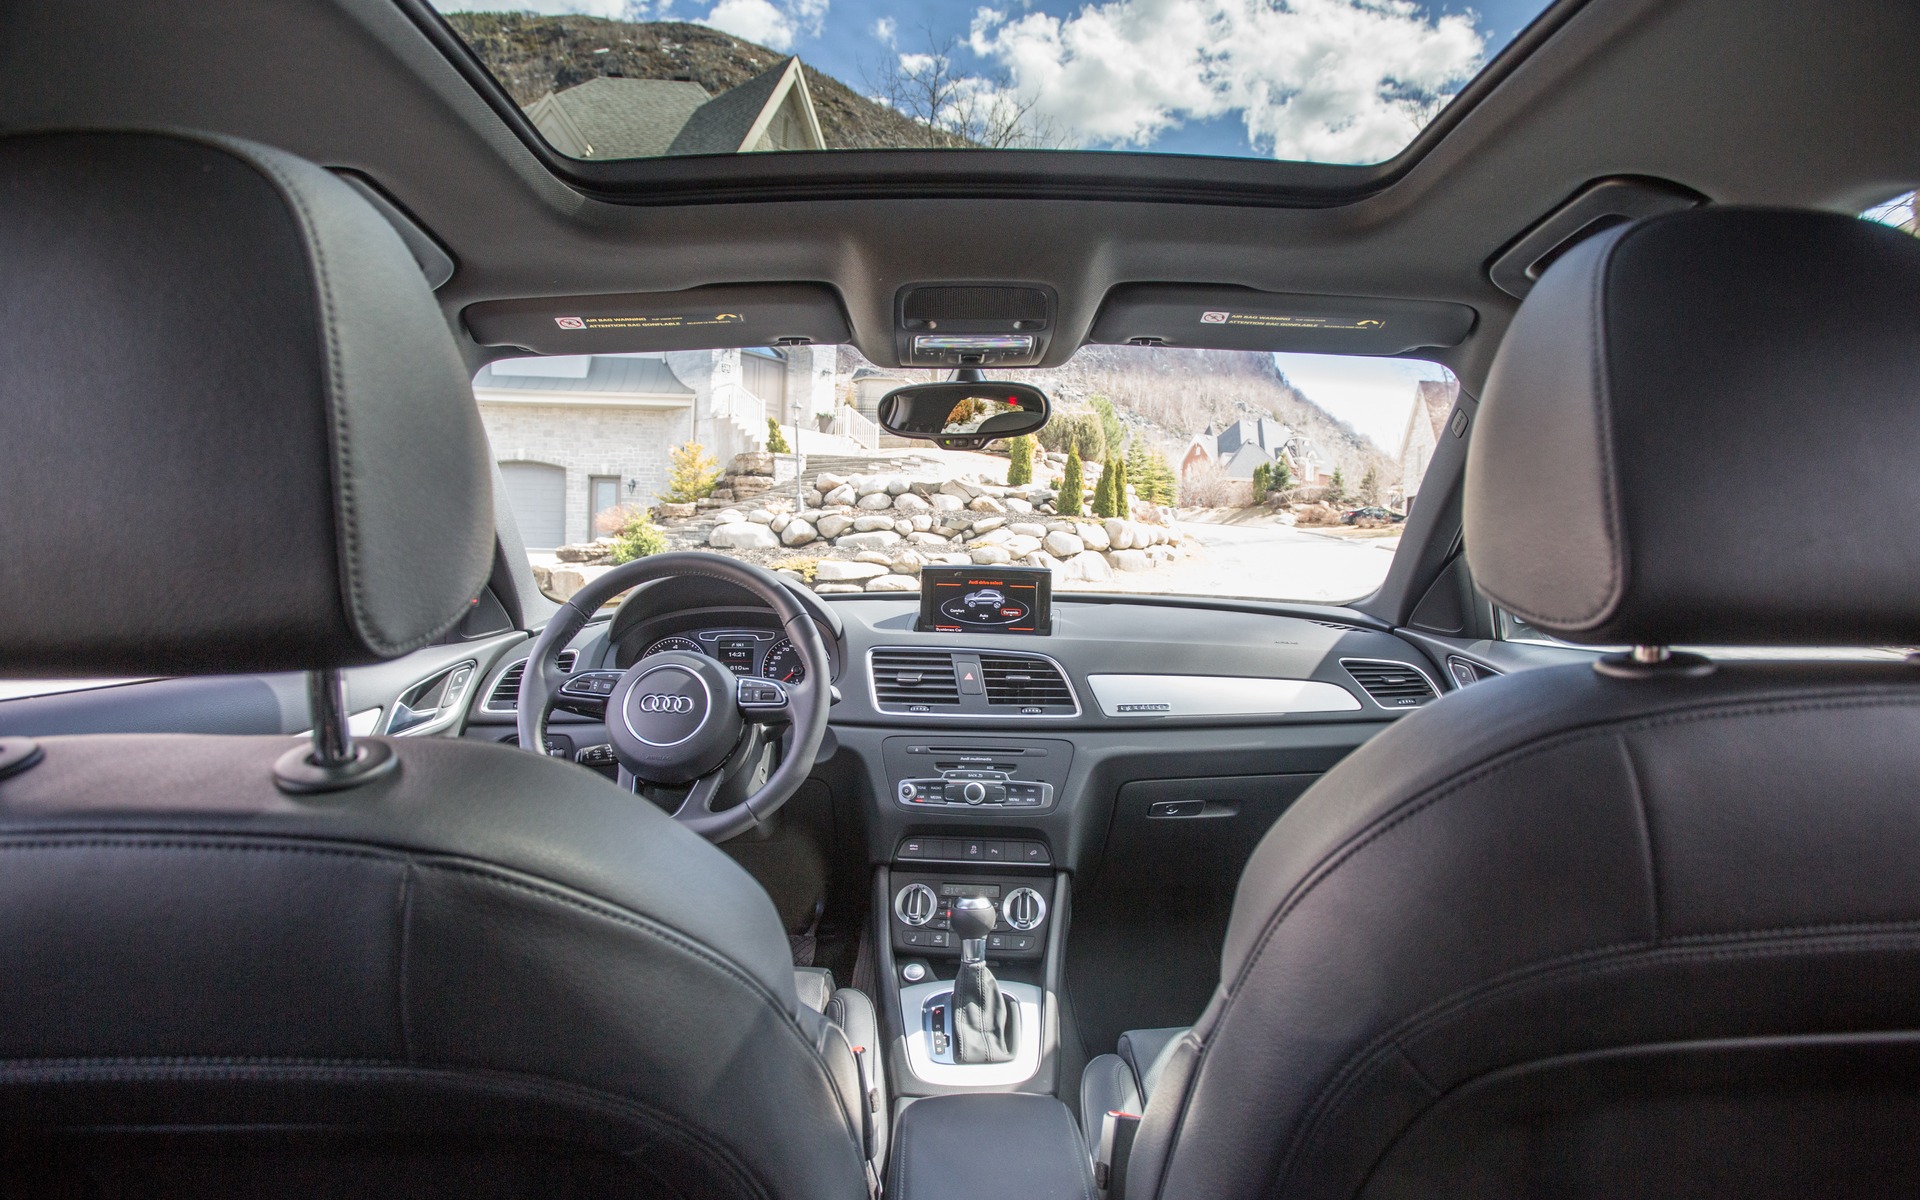 The 2015 Audi Q3's cabin design is perfectly adequate, but nothing more.